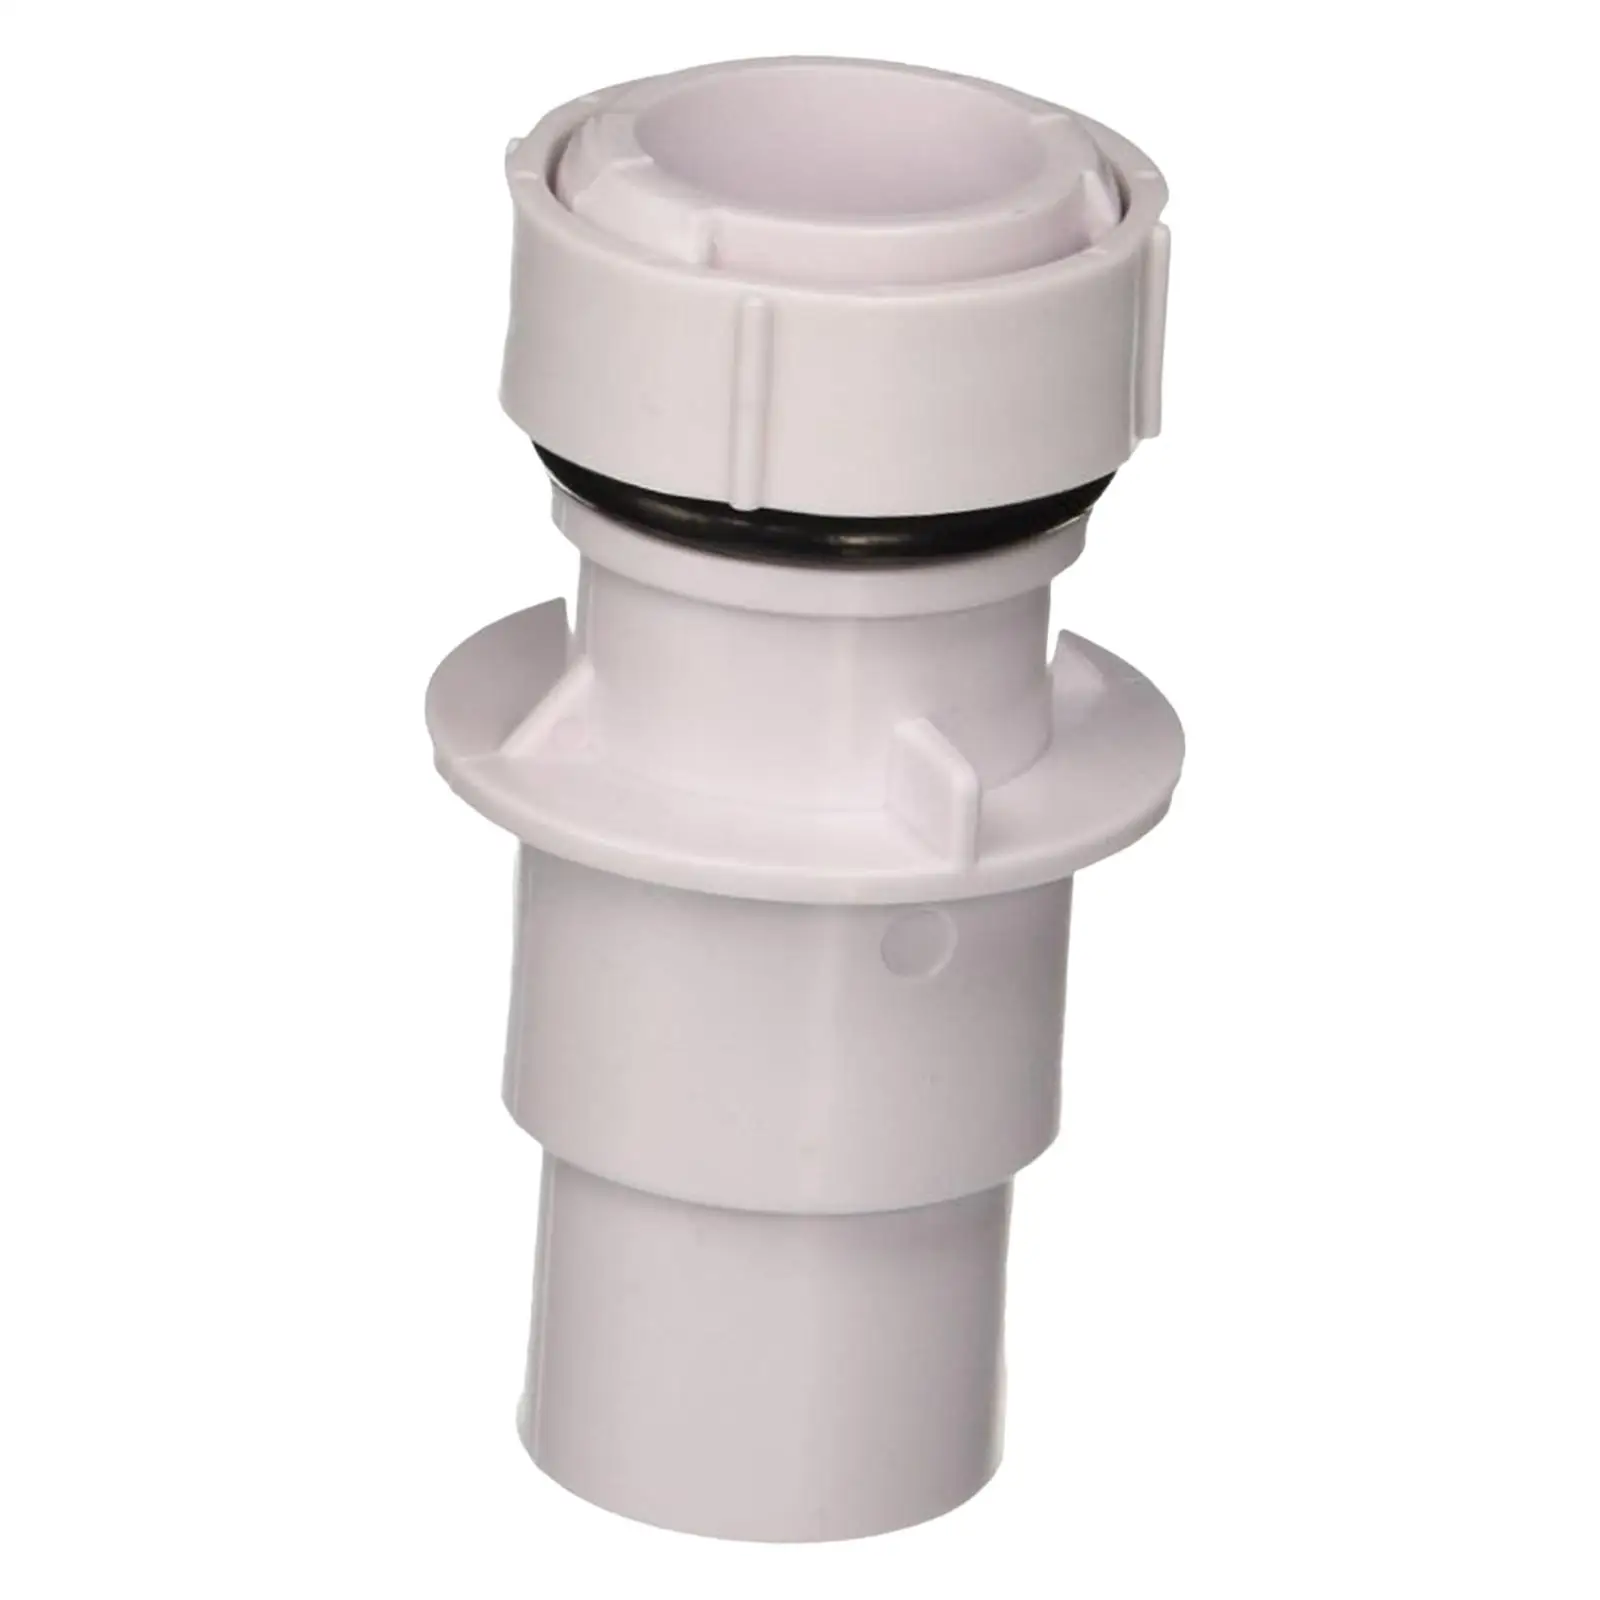 Pool Fittings Quick Connect Sturdy above Ground Pool Hose Coupling for Skimmer Plumbing Connection Filter above Ground Pool Pump